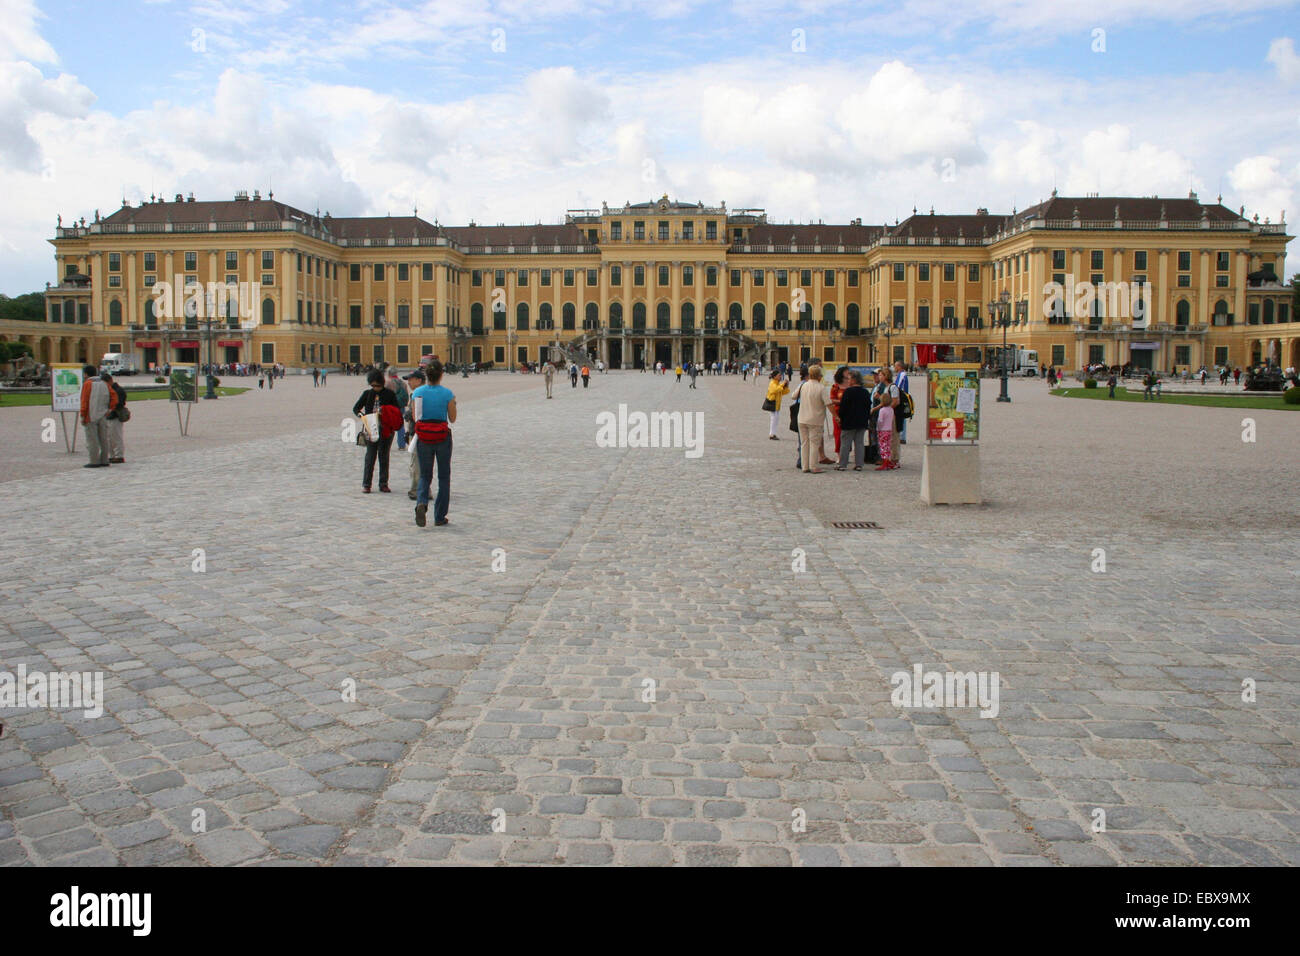 tourists in front of the castle Schoenbrunn, Austria, Vienna Stock Photo